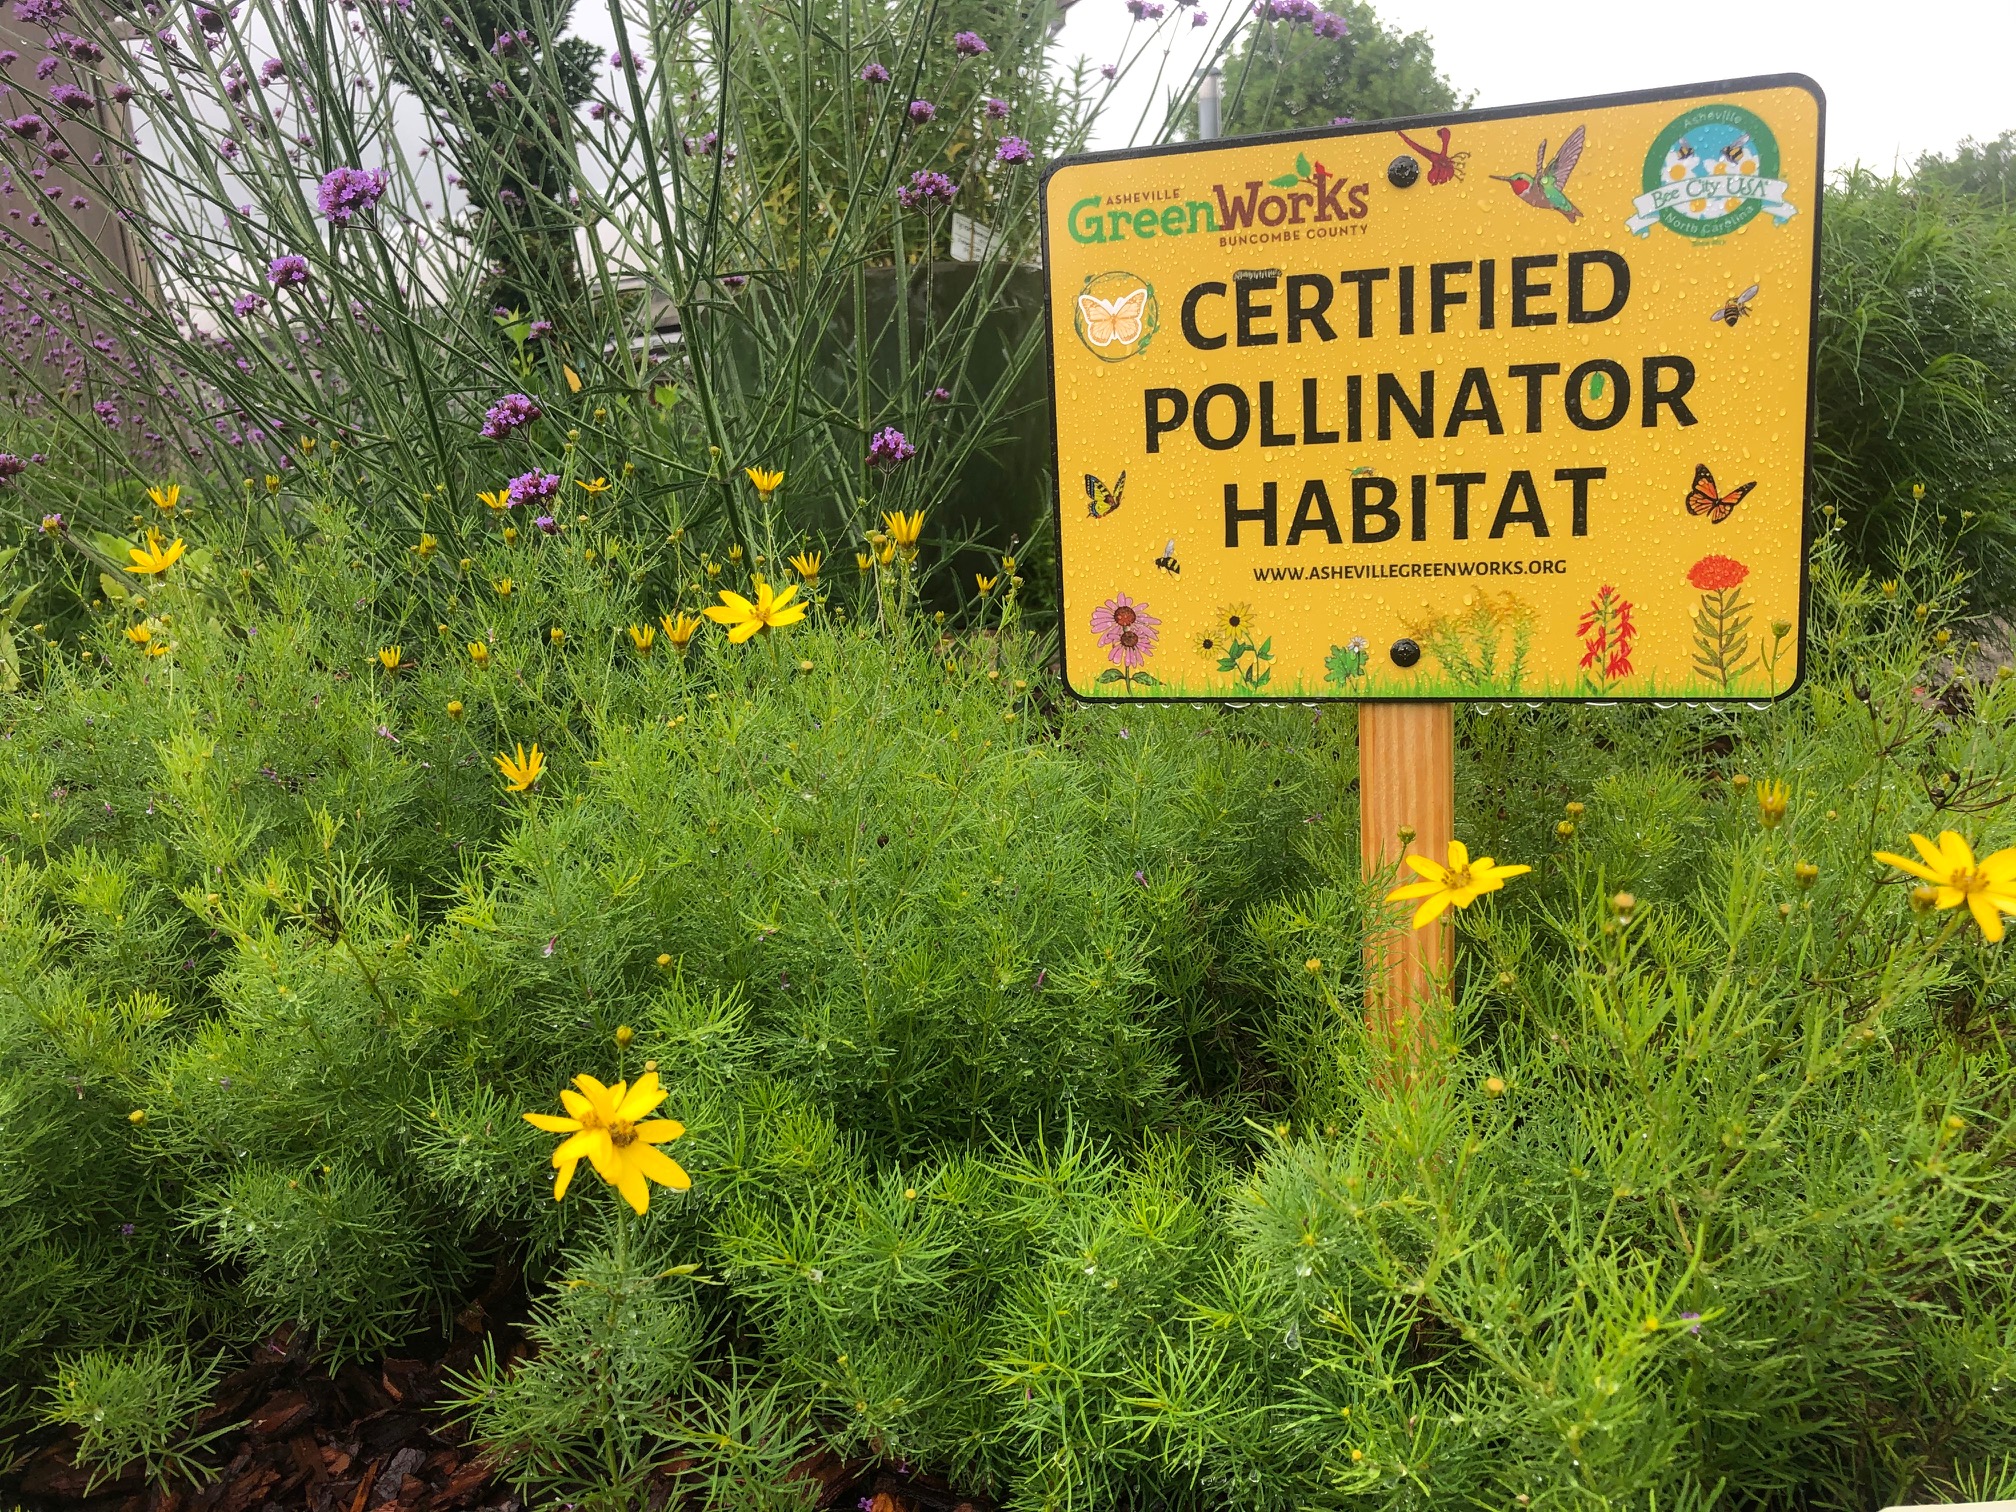 In the middle of a flower-filled garden is a yellow sign that says "certified pollinator habitat"